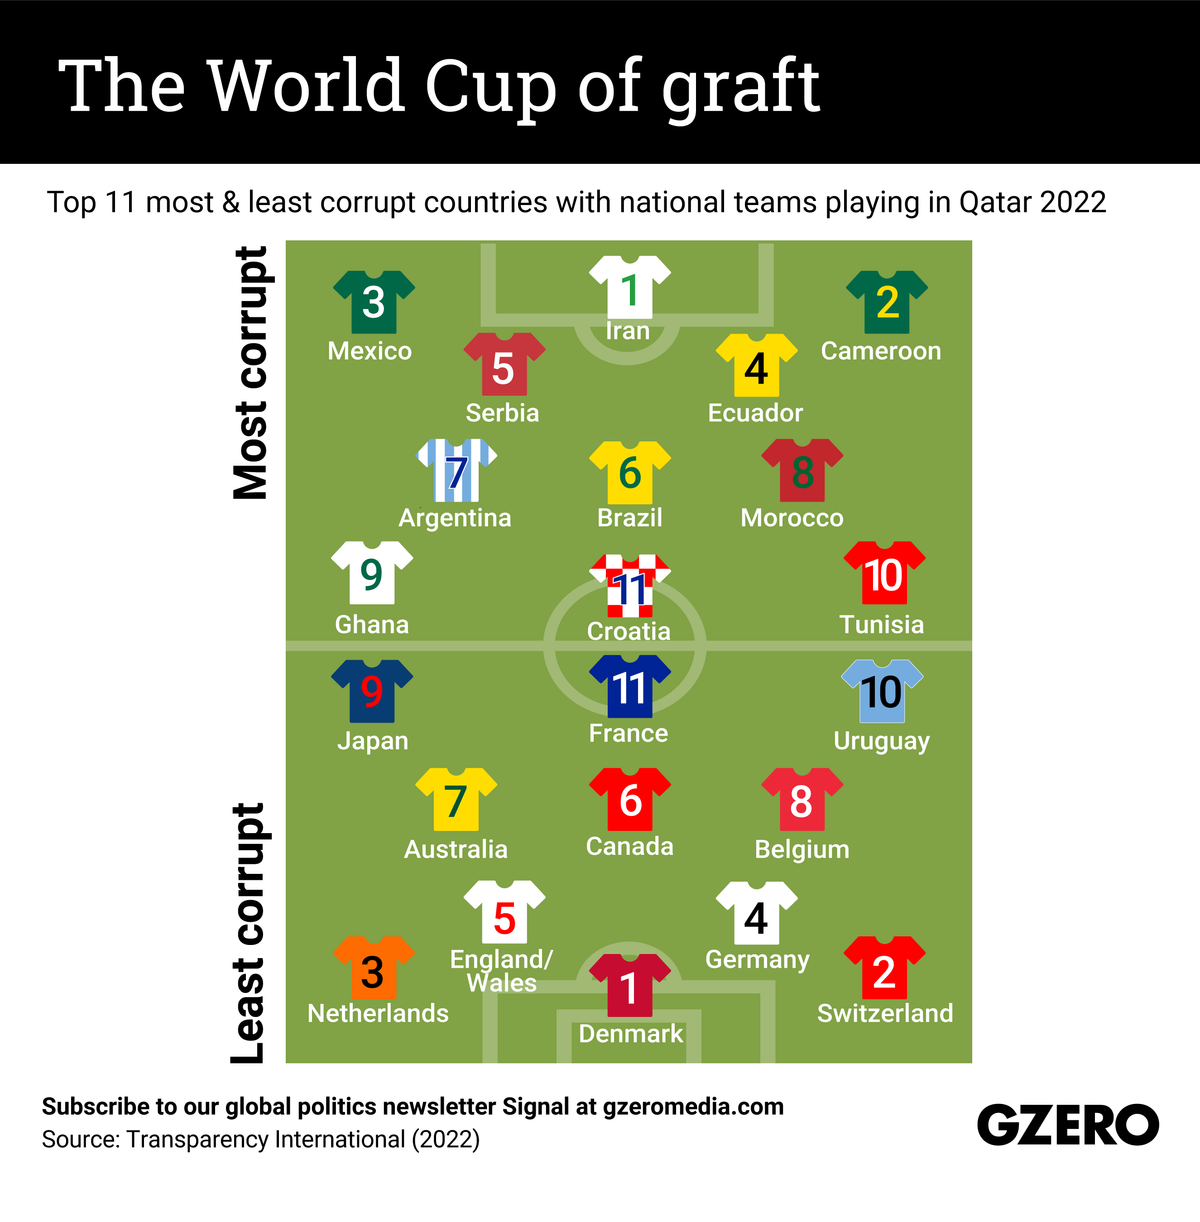 The 11 most and least corrupt countries playing in the soccer World Cup arranged by ranking order on a pitch